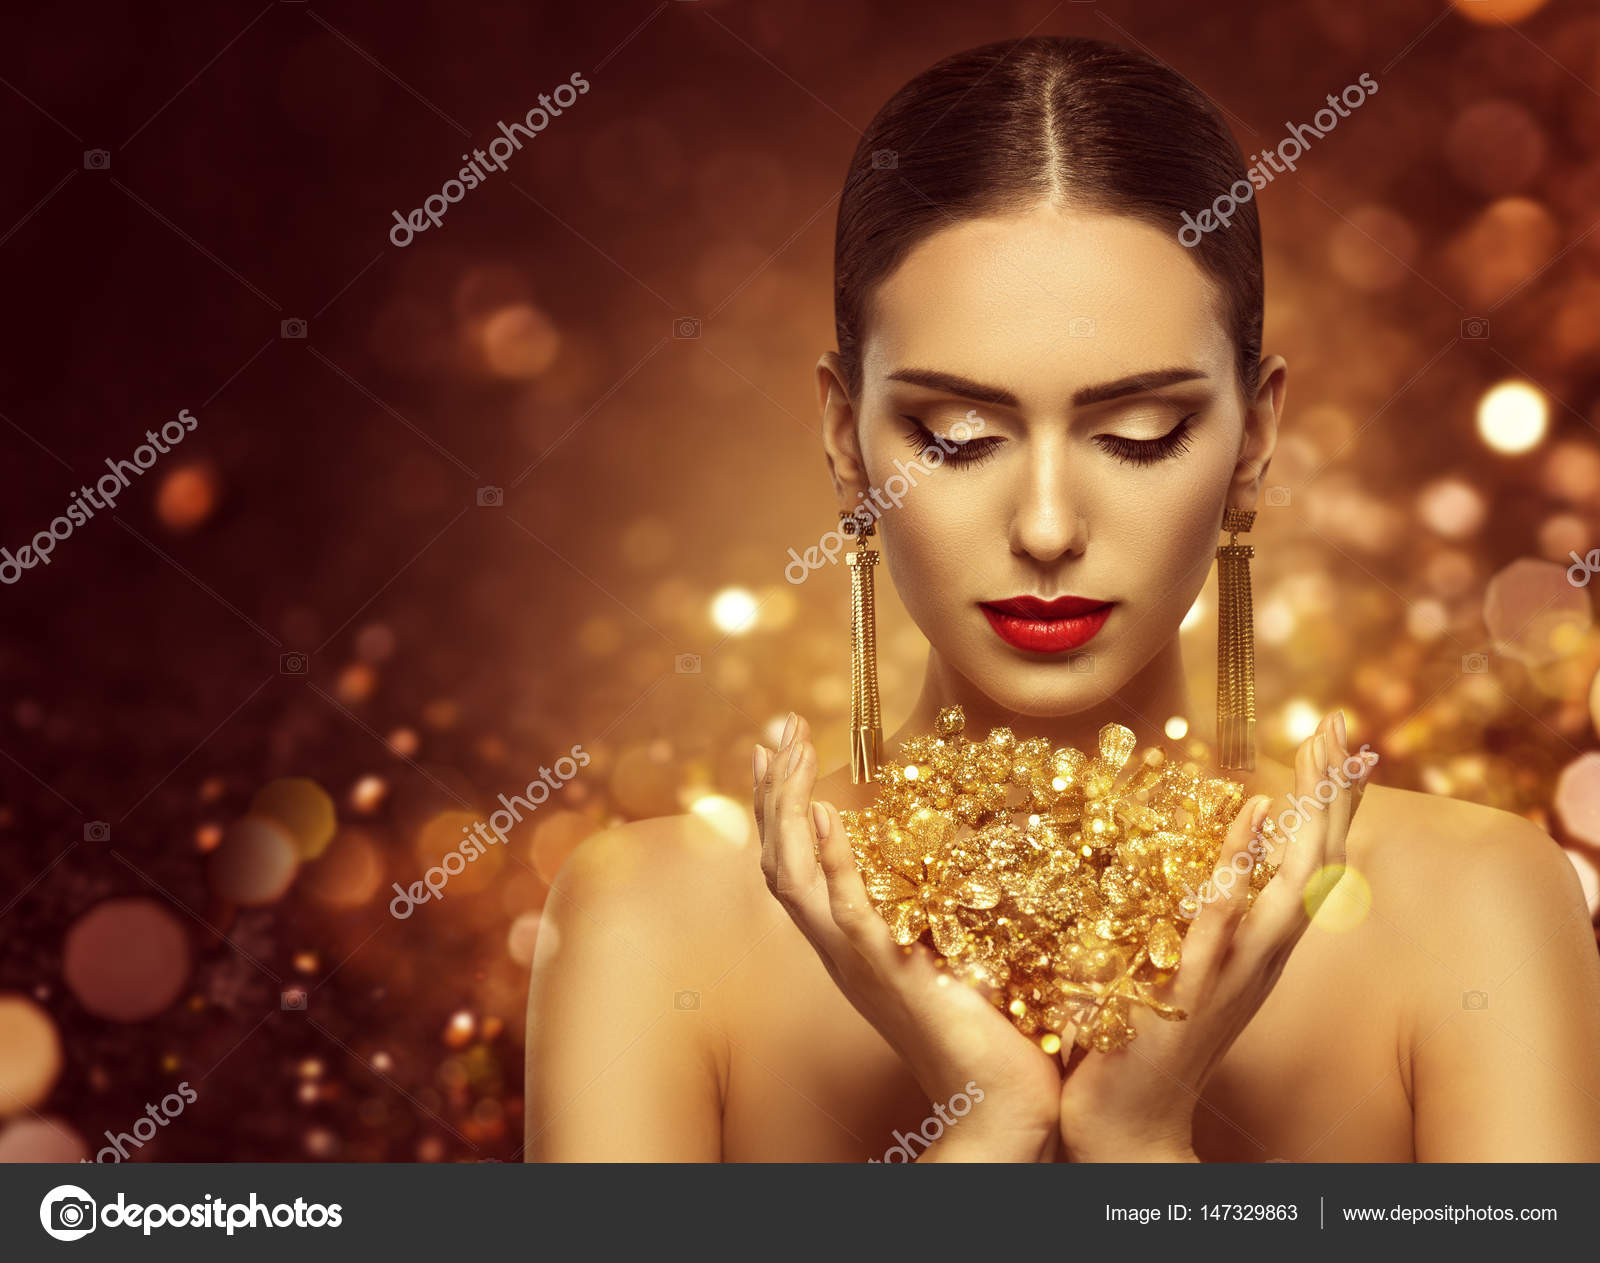 Fashion Model Holding Gold Jewelry in Hands, Woman Golden Beauty ...